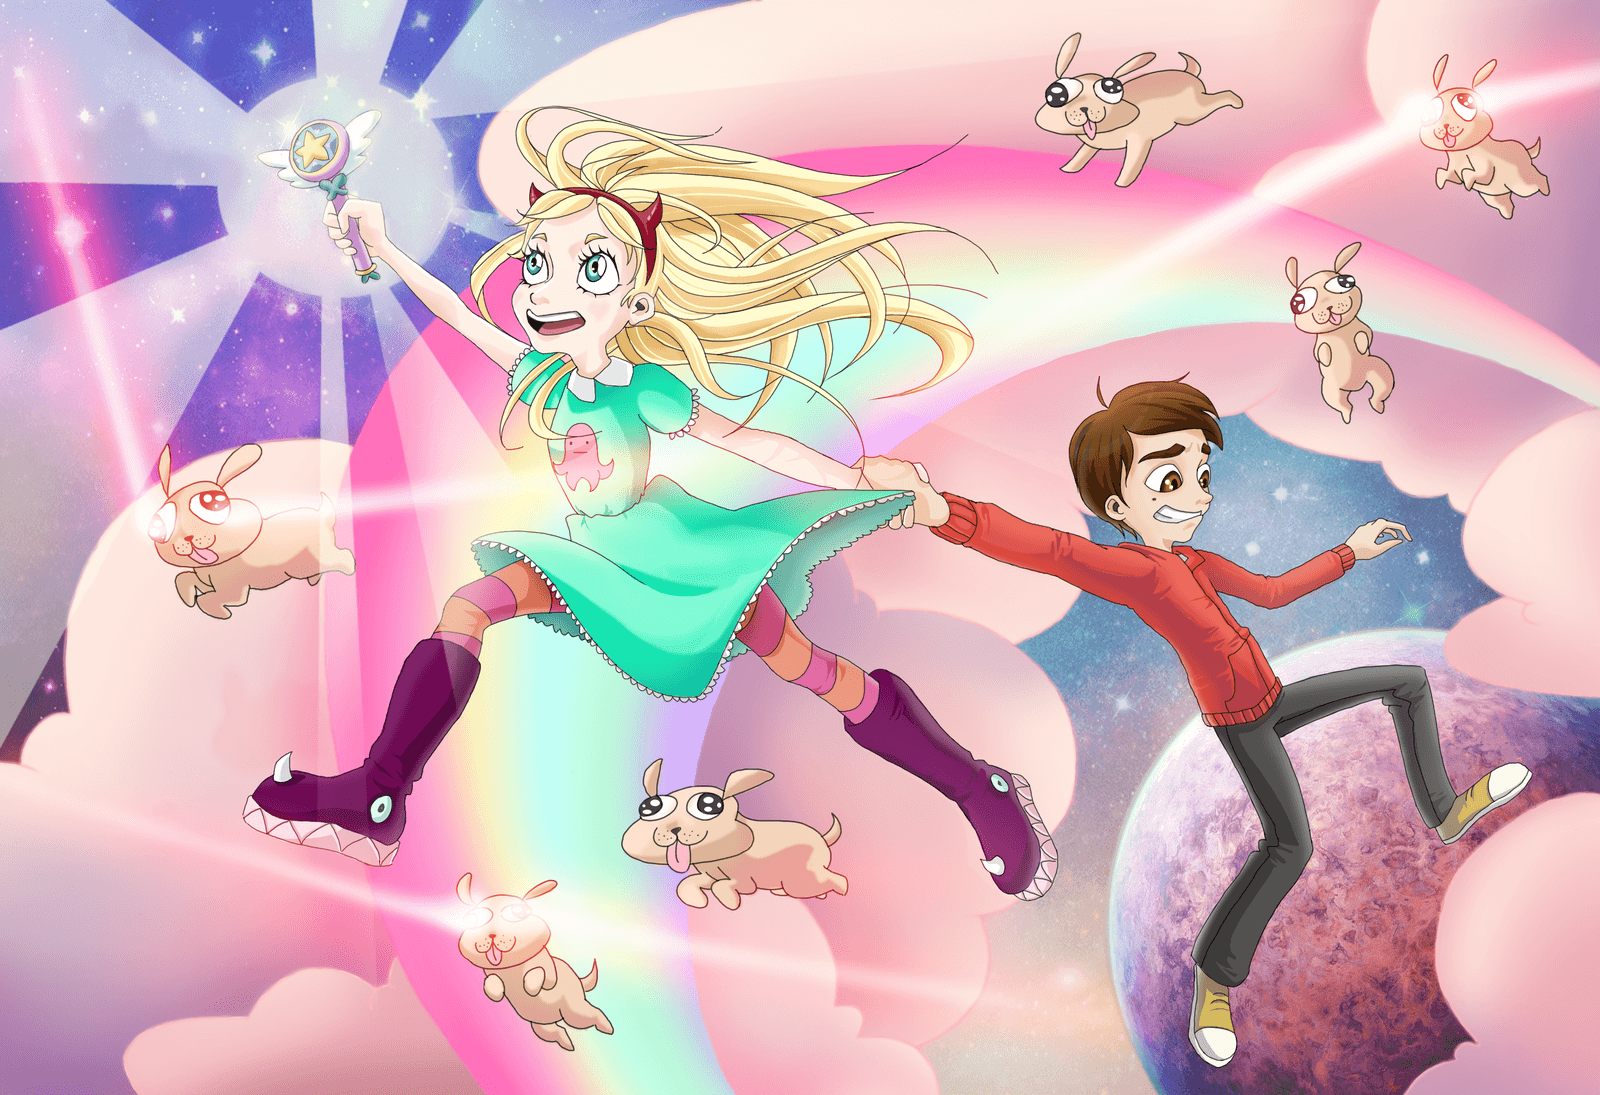 Star Vs The Forces Of Evil Wallpaper - Local Search Denver Post